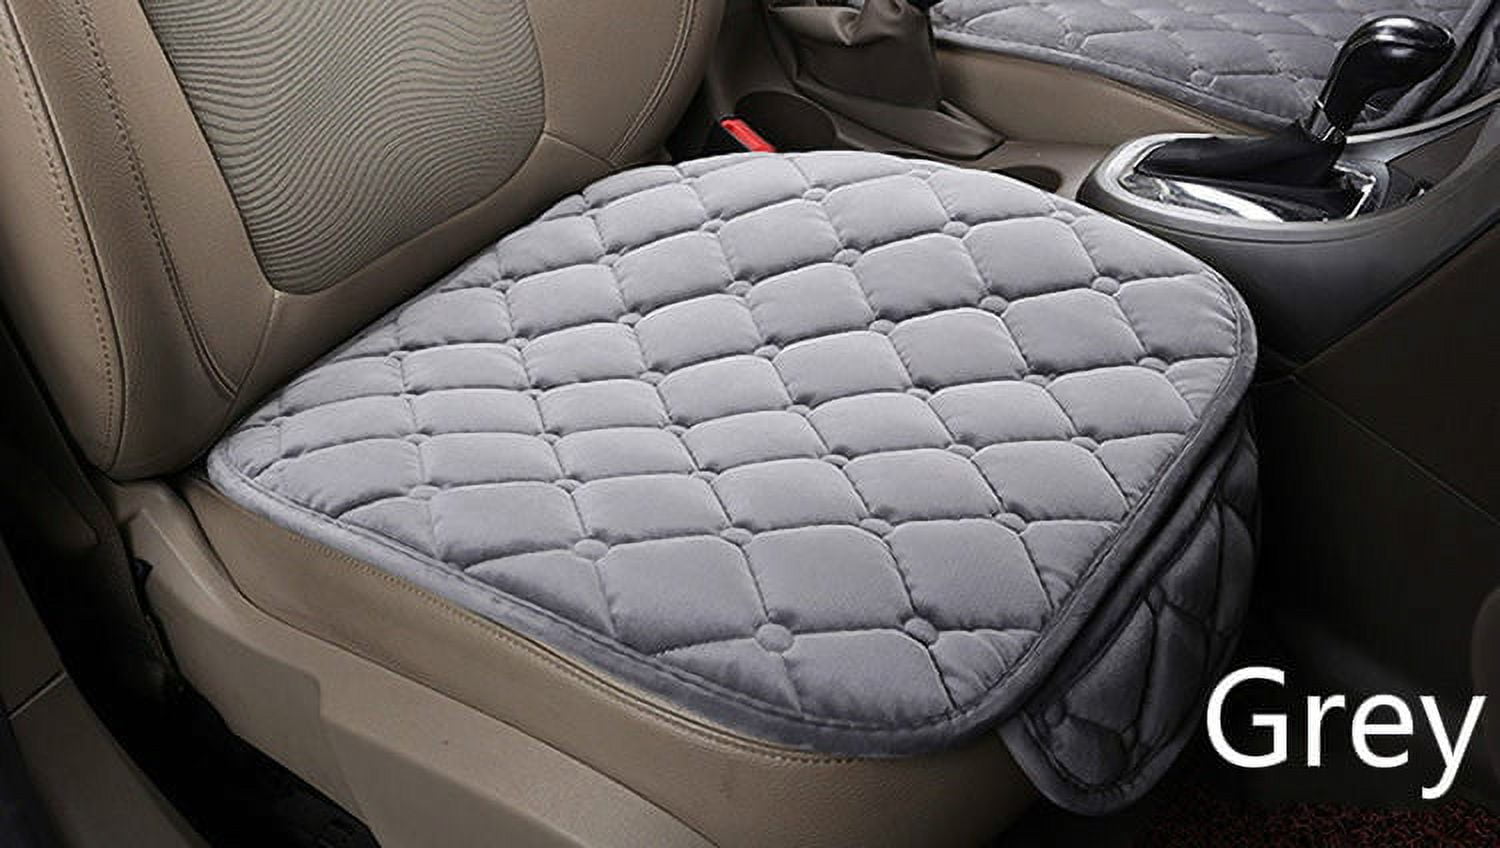 KZKR Car Seat Cushion Pad Comfort Seat Protector for Car Driver